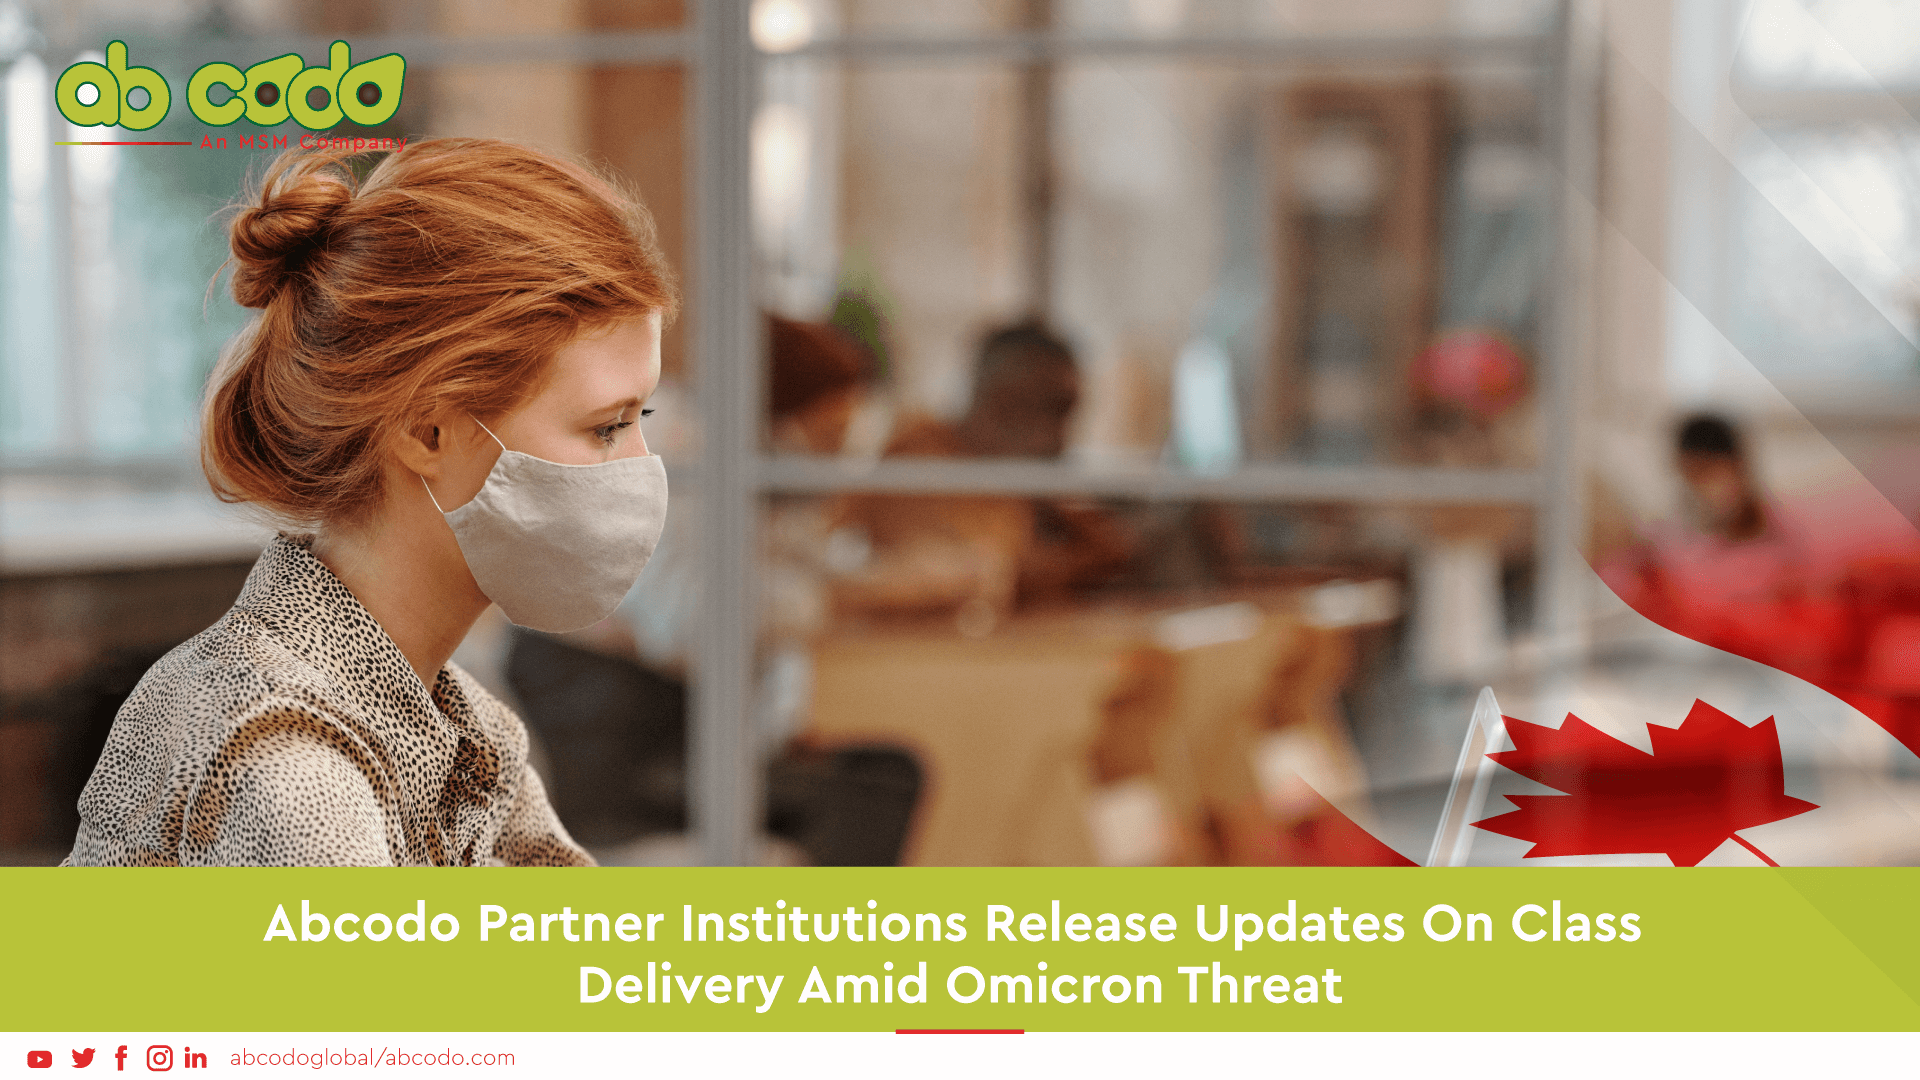 Abcodo Partner Institutions Release Updates On Class Delivery Amid Omicron Threat